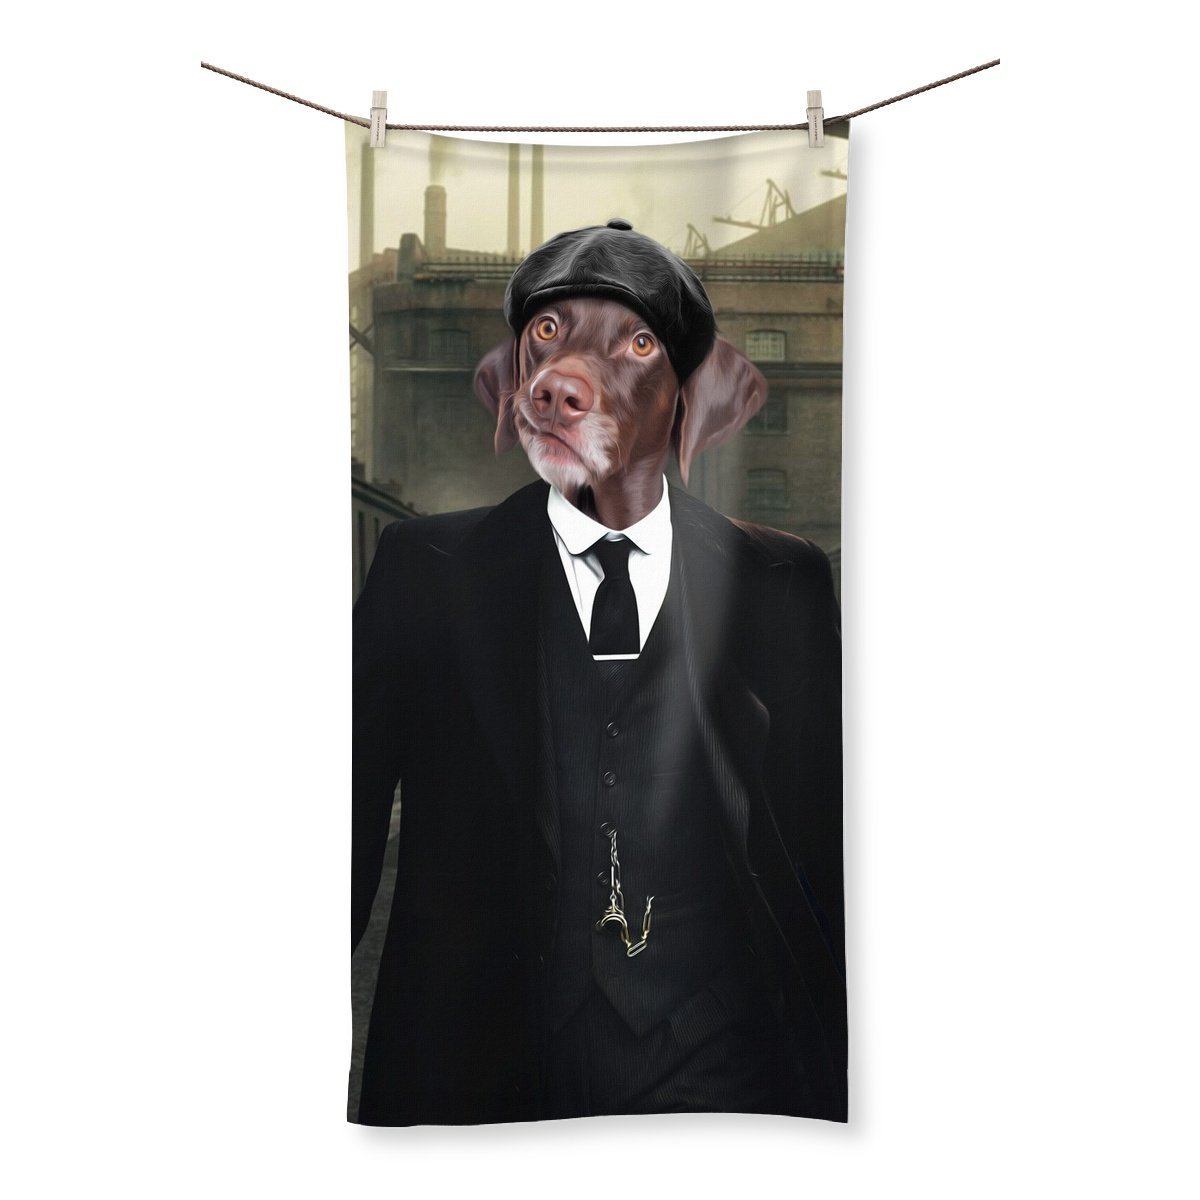 Peaky Blinders (Male): Custom Pet Towel - Paw & Glory - #pet portraits# - #dog portraits# - #pet portraits uk#Paw & Glory, pawandglory, dog astronaut photo, the admiral dog portrait, dog portraits singapore, drawing pictures of pets, the general portrait, for pet portraits, pet portraits,pet art Towel